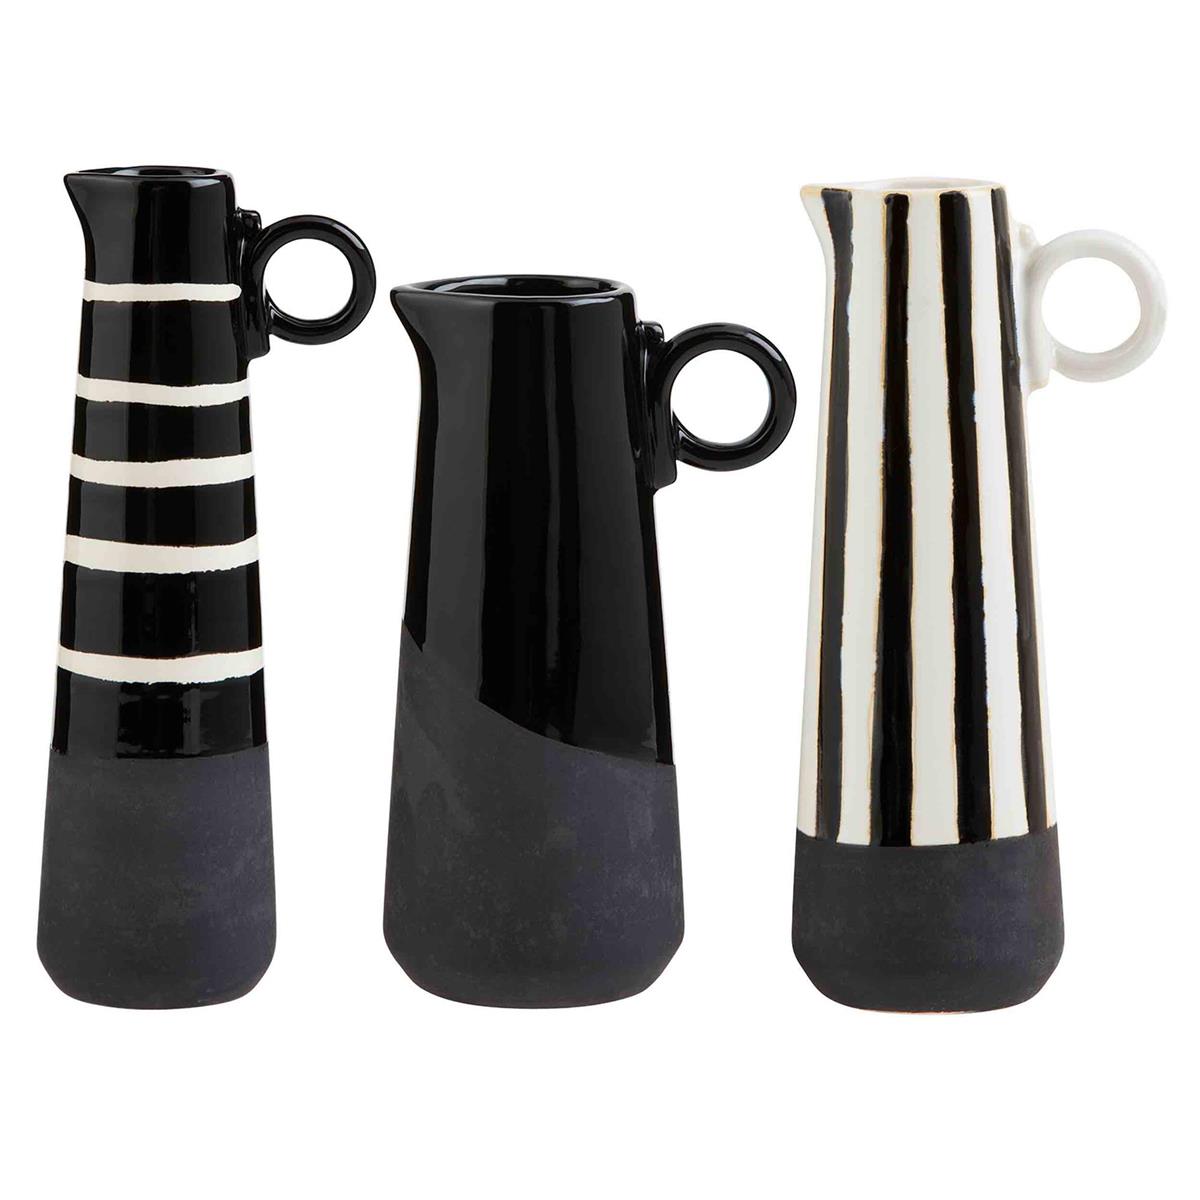 all three styles of black and white bud vases against a white background